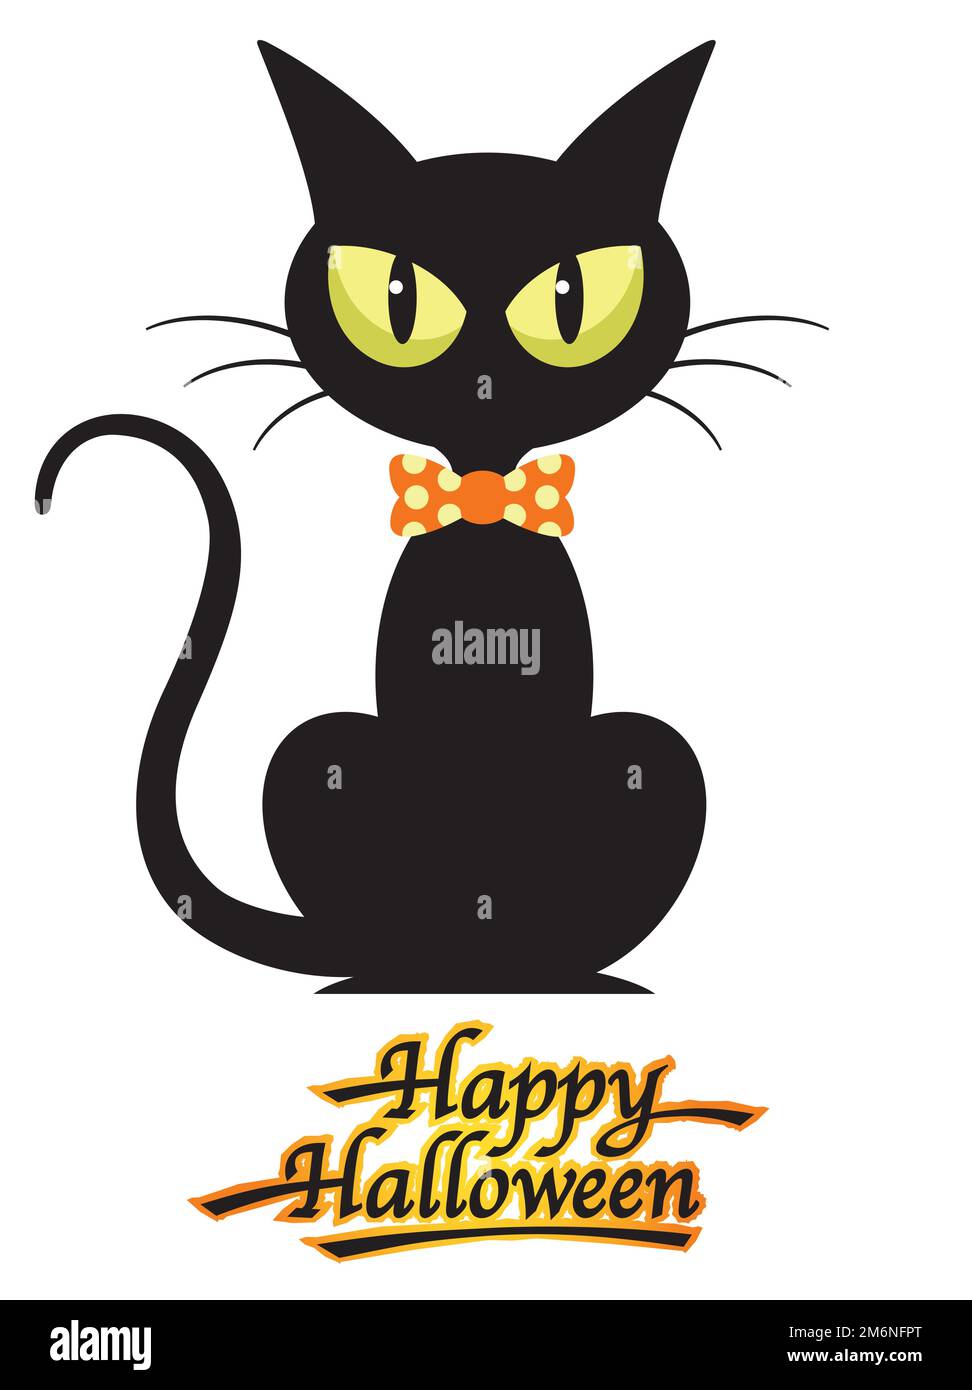 Vector Black Cat Illustration With Happy Halloween Logo Isolated On A White Background. Stock Vector